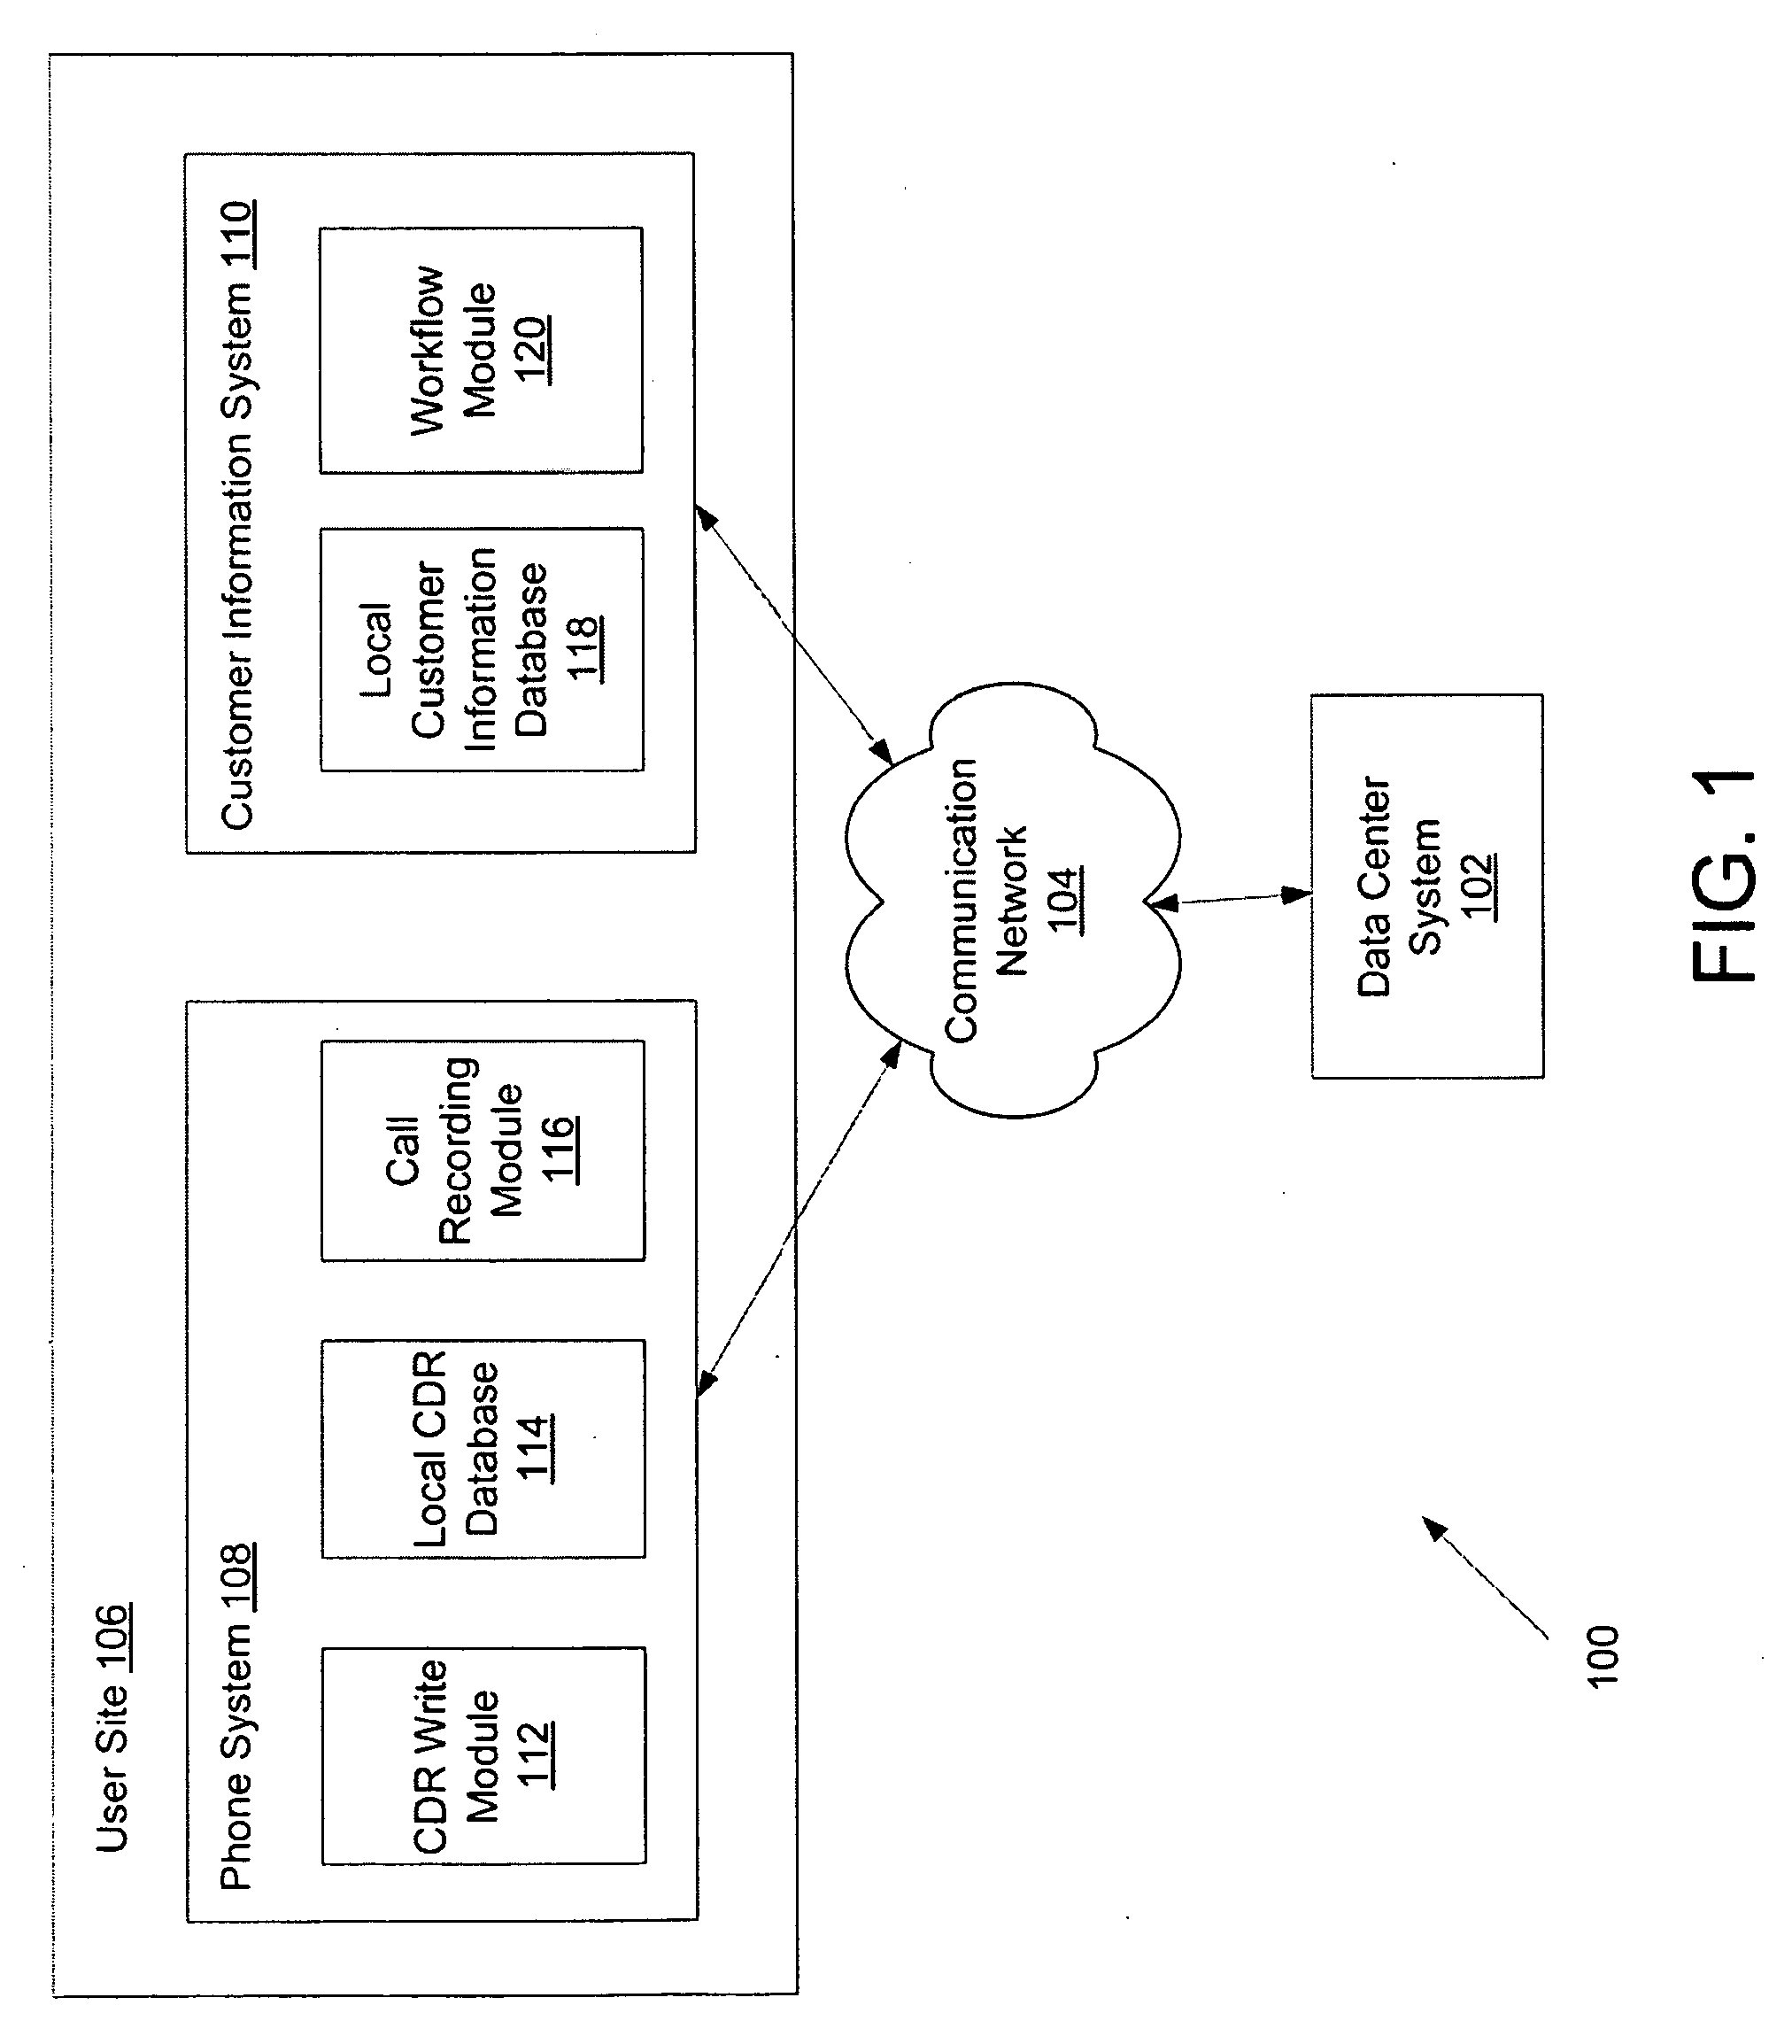 System and method for automatic insertion of call intelligence in an information system